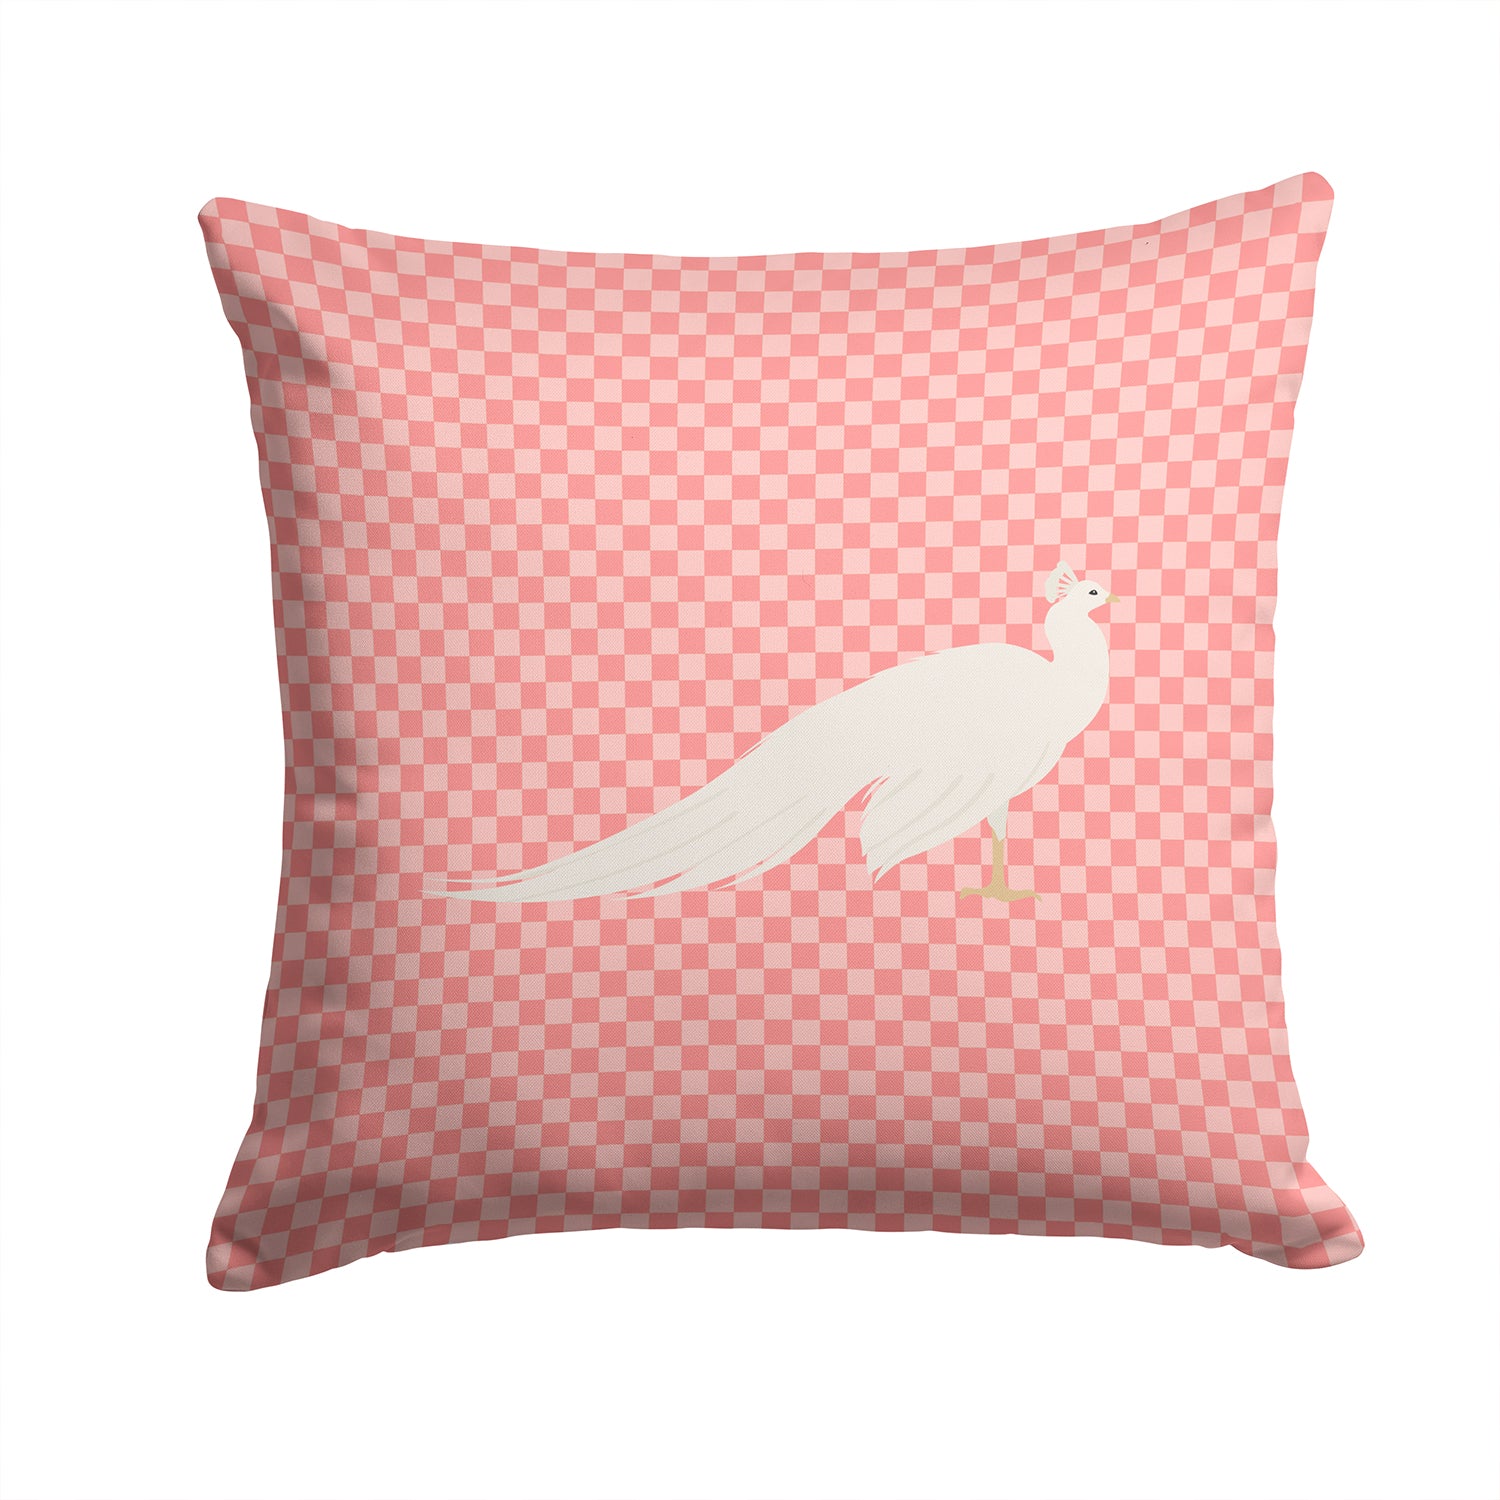 White Peacock Peafowl Pink Check Fabric Decorative Pillow BB7926PW1414 - the-store.com